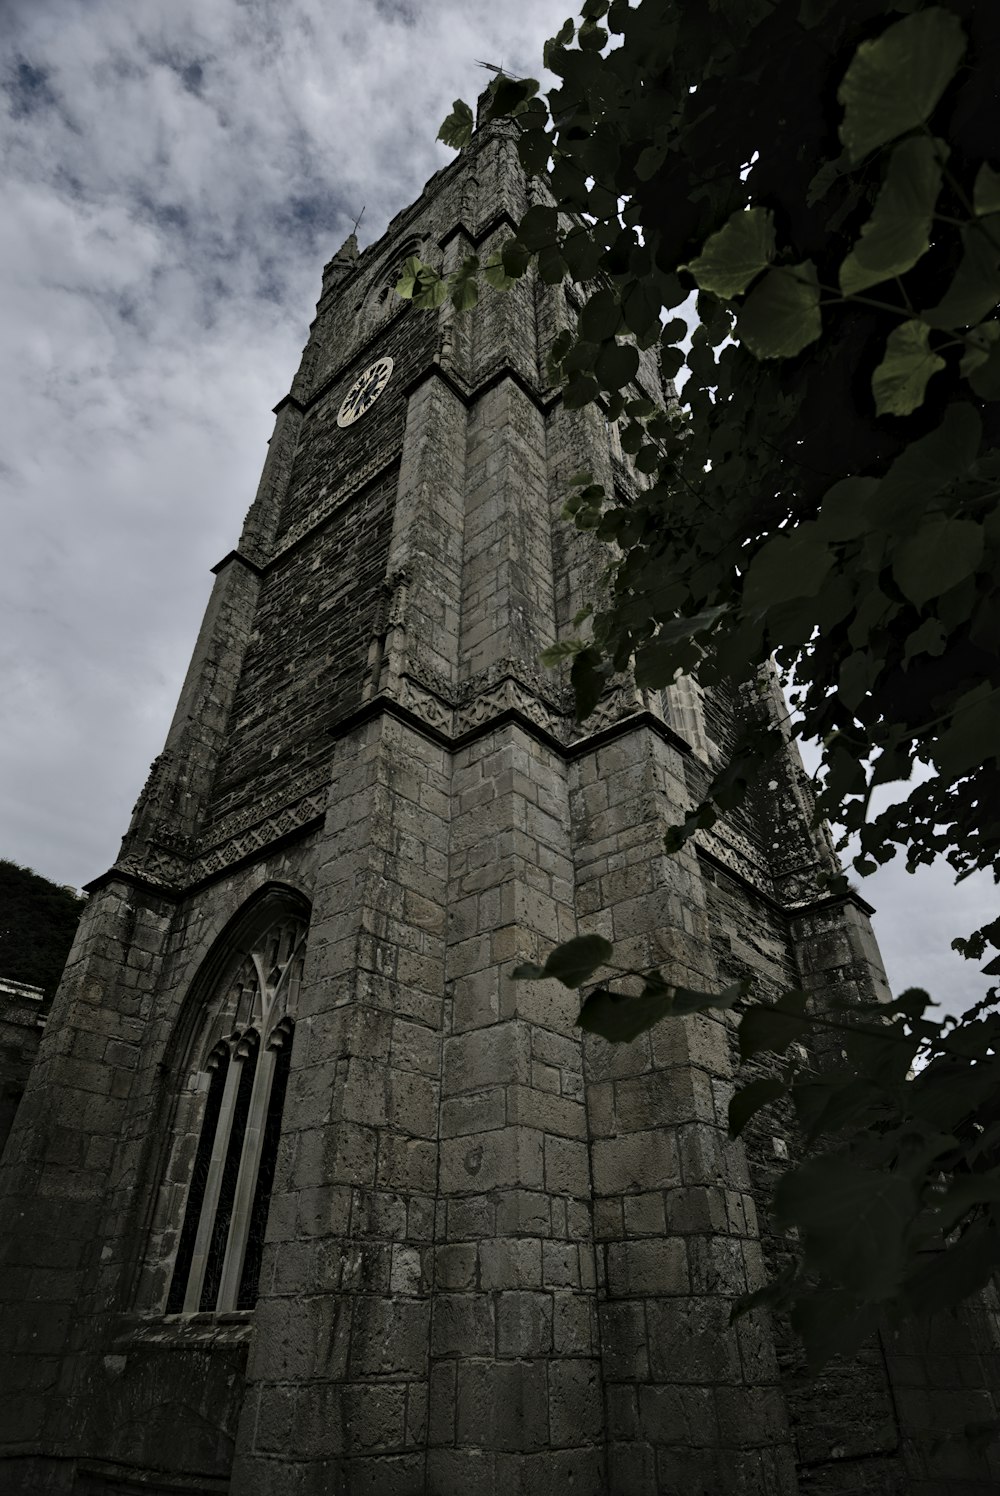 a clock on a stone tower